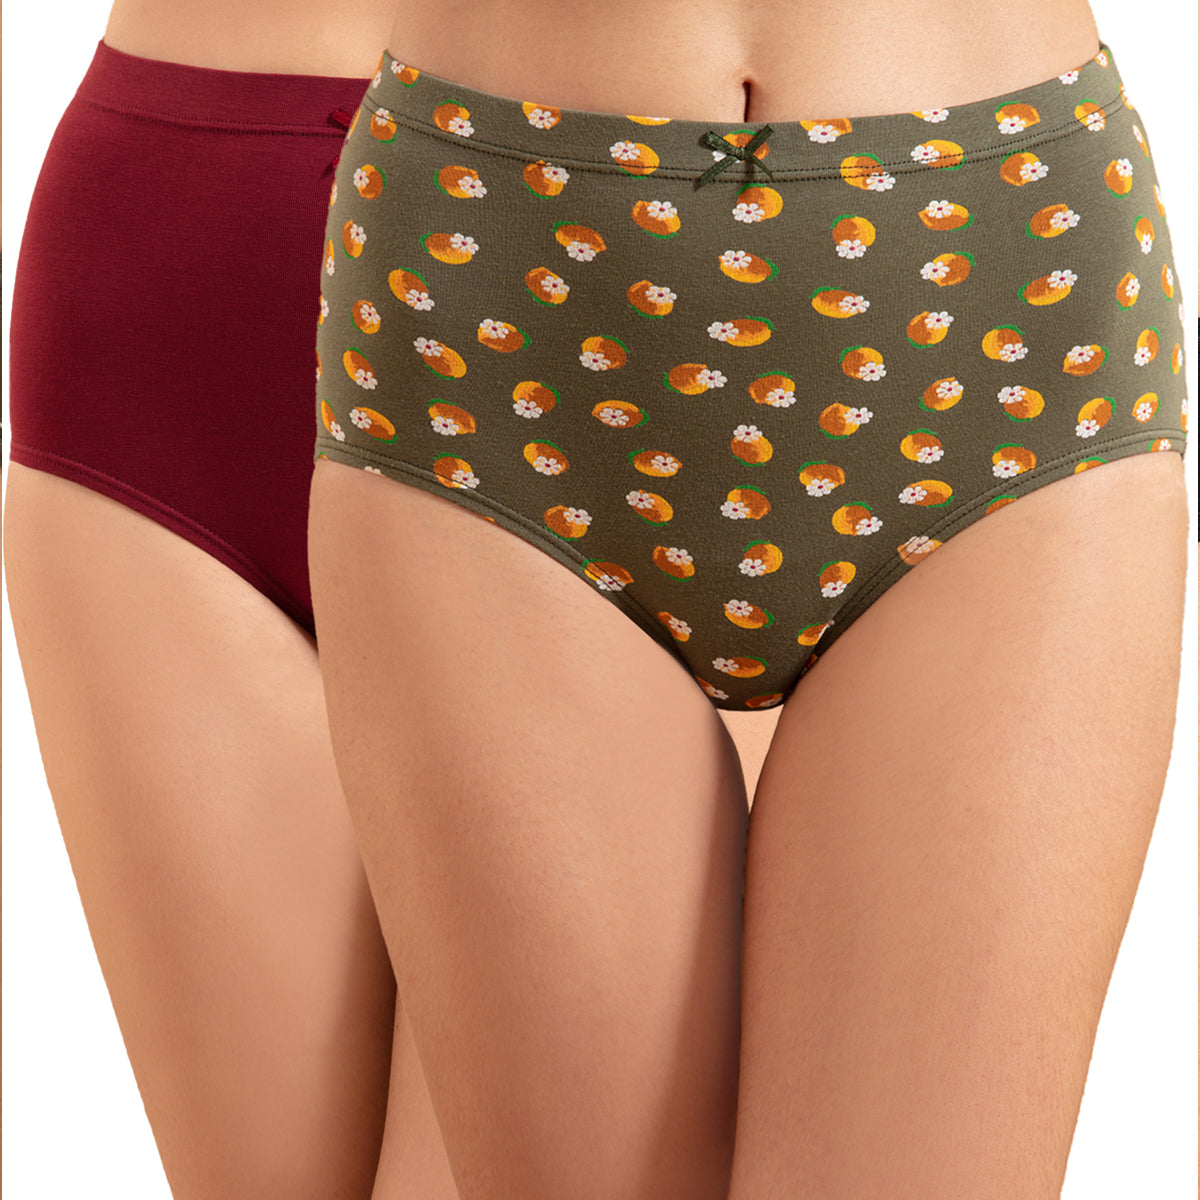 NYKD X Masaba Pack Of 2 Cotton Full Brief with Anti odor-NYP015-Lemon Aop, Cabernet